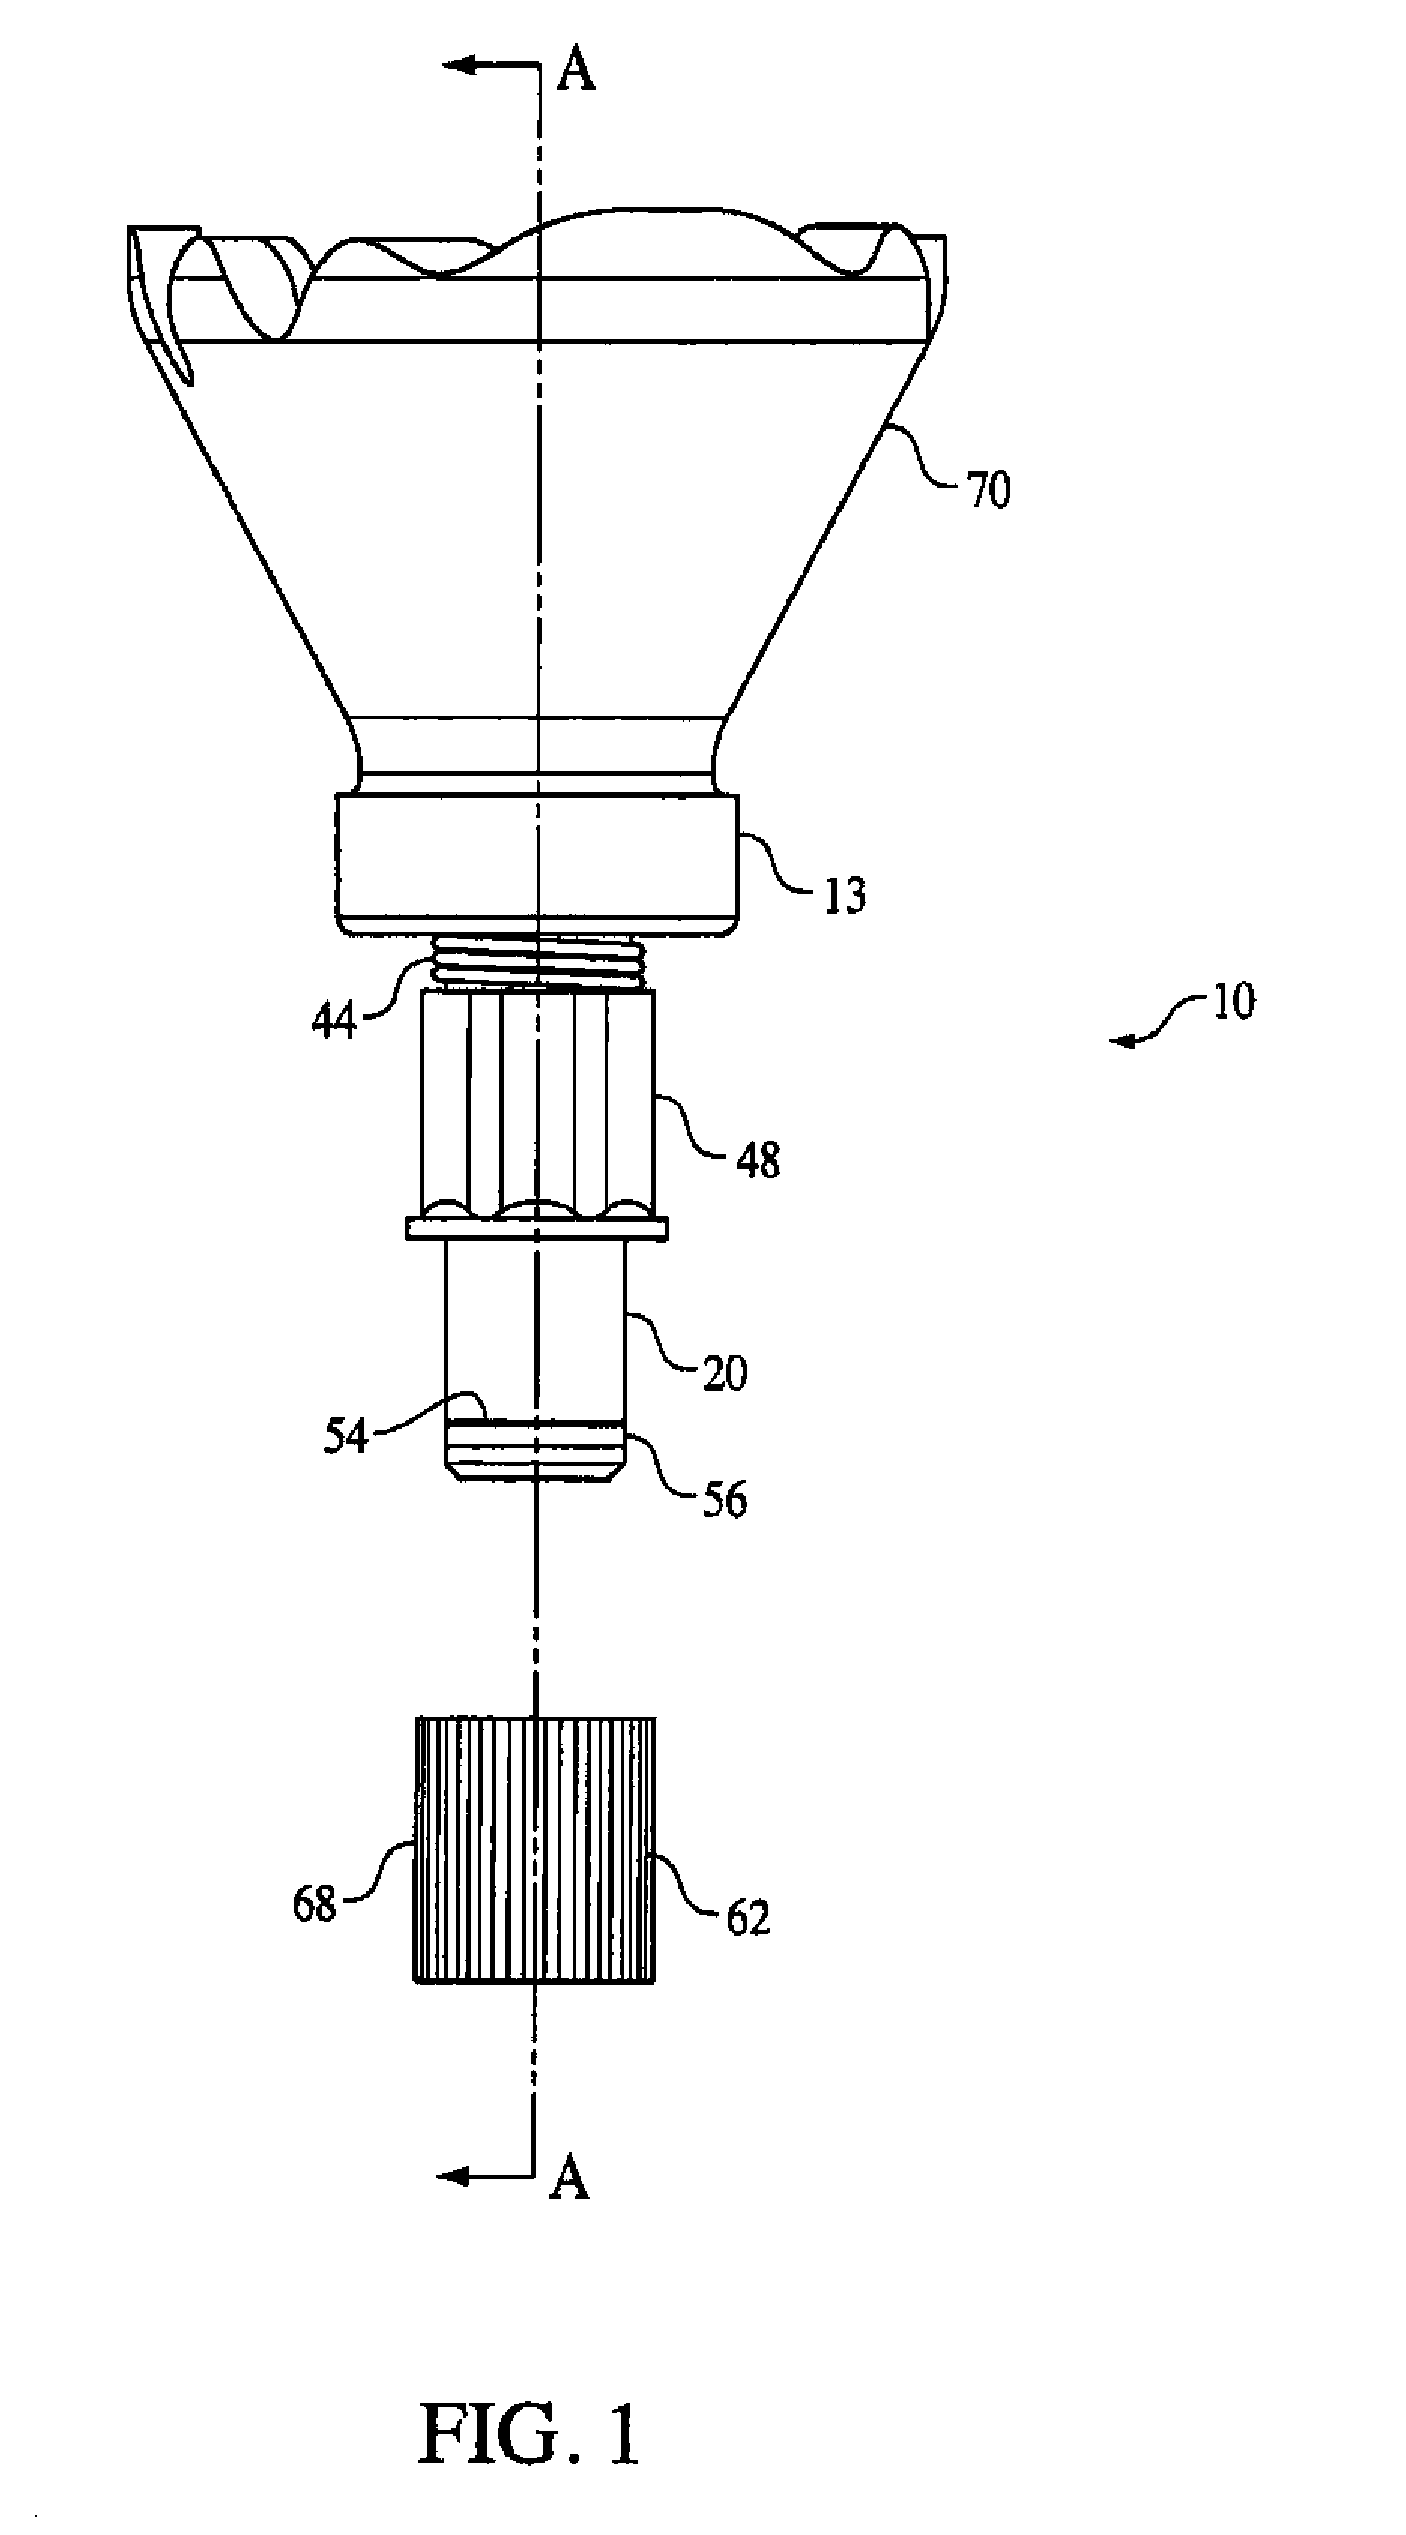 Smooth-sided outlet device for controlling anesthetic flow in vaporizer with plunger